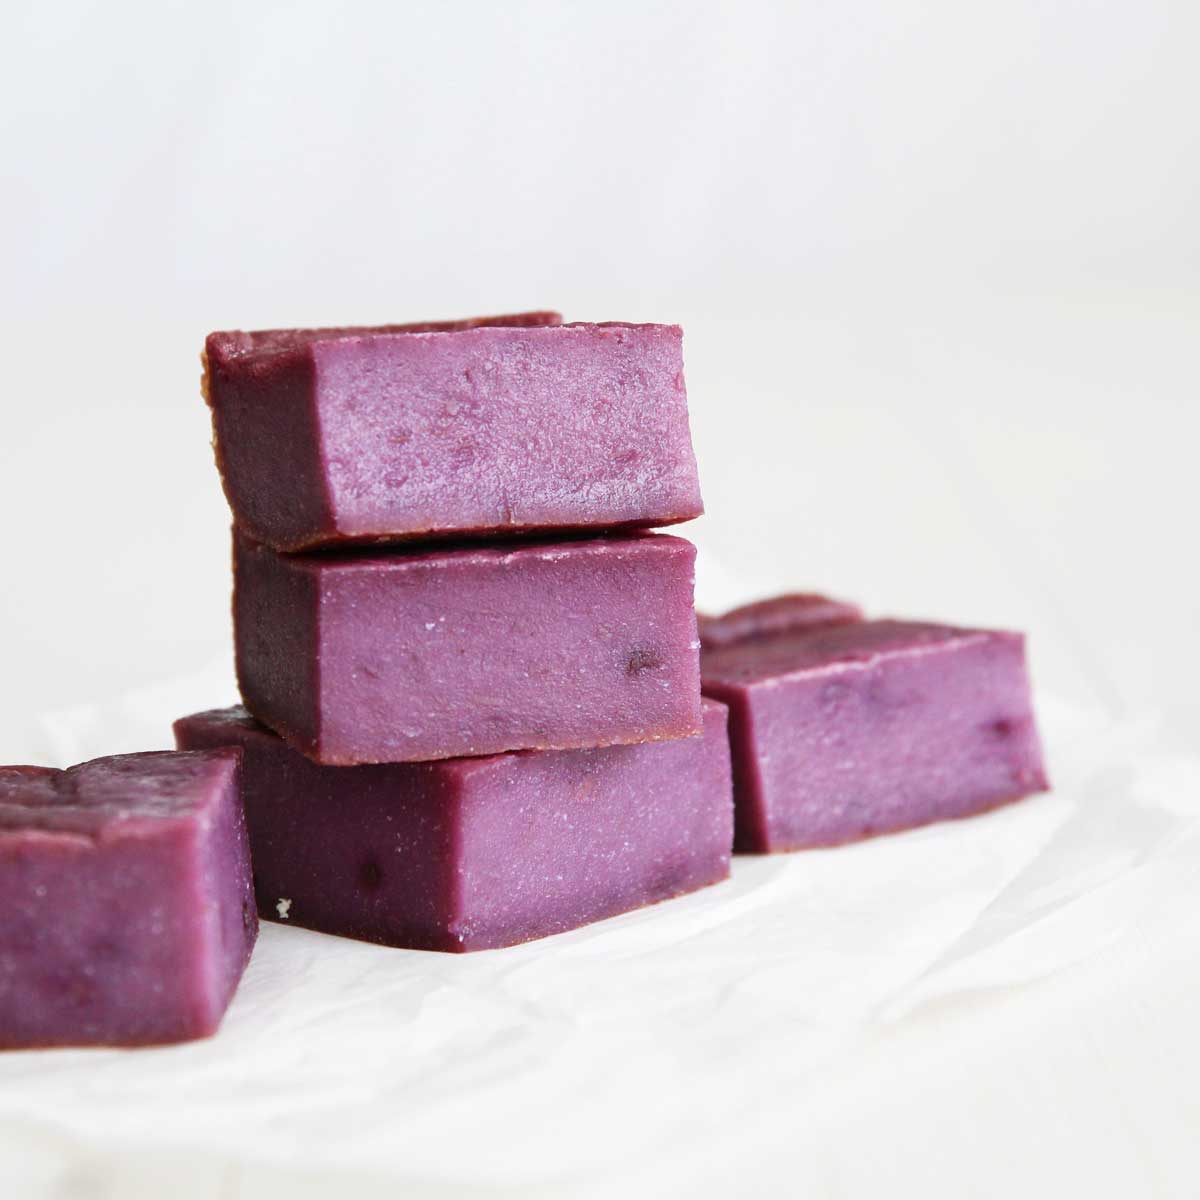 Deliciously Purple Ube Mochi Cake (Baked Nian Gao) - cashew butter mooncakes